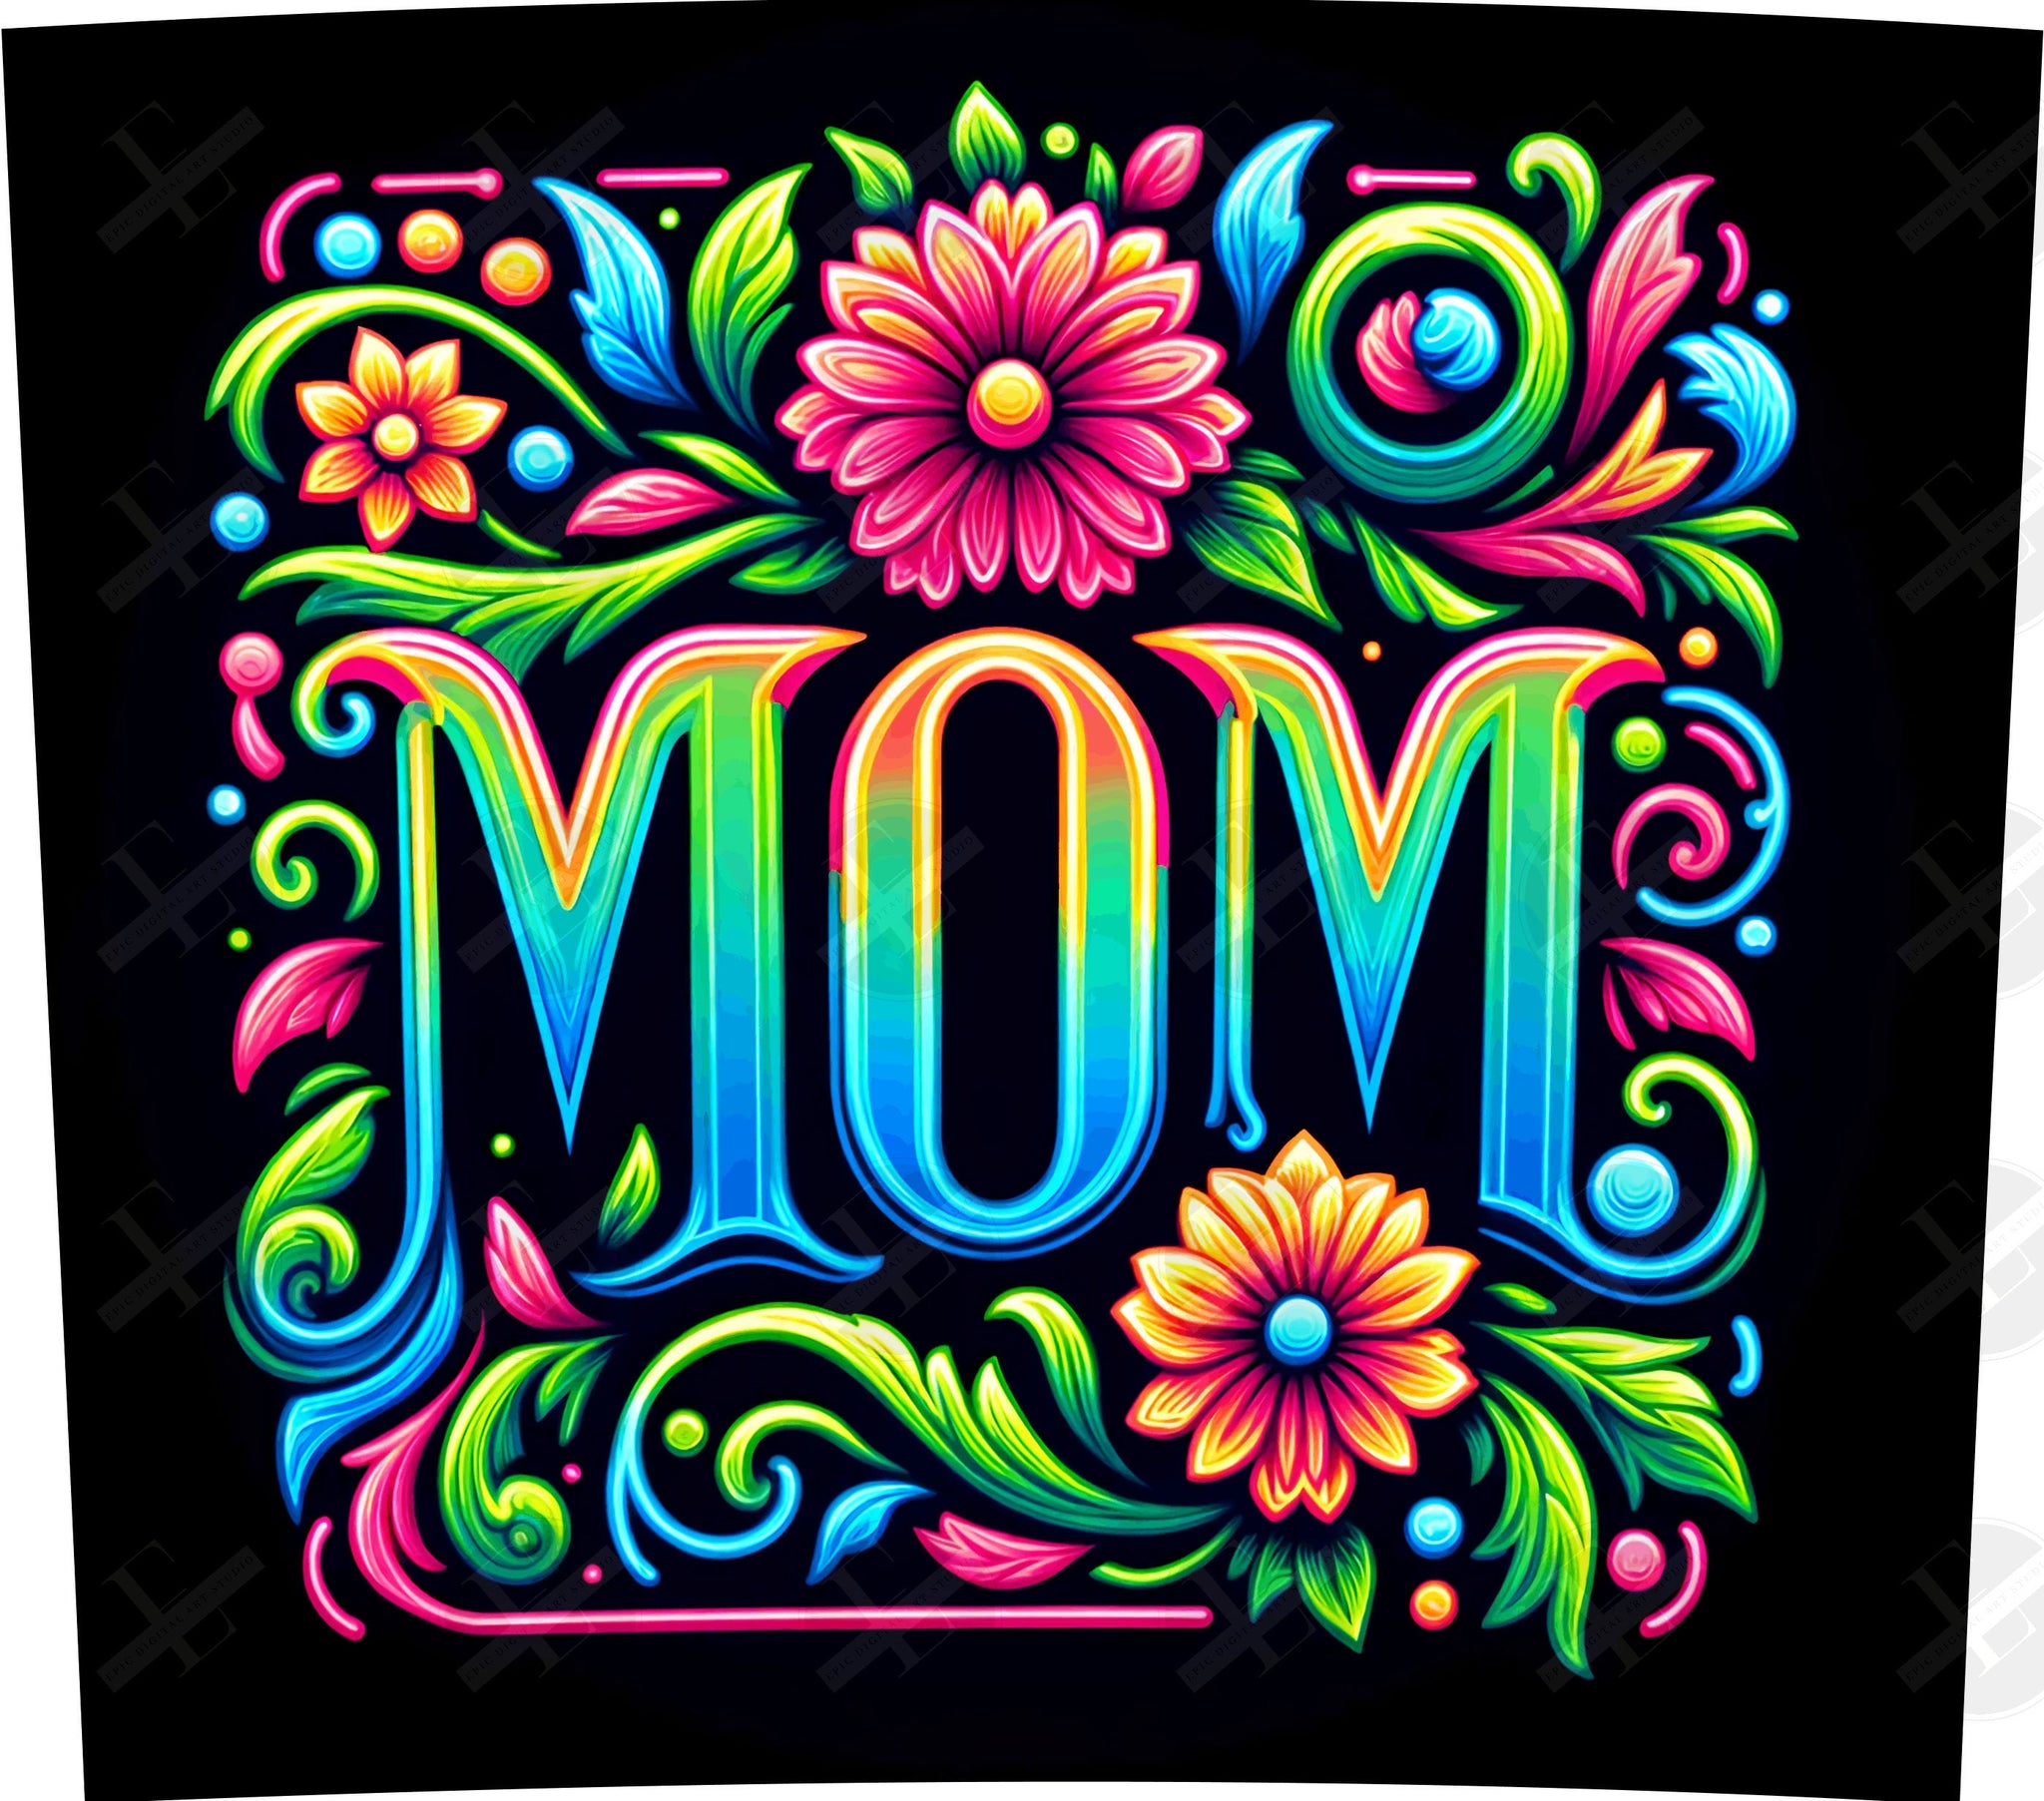 Mom Tumbler Wraps - Mom In Neon Floral Skinny Tumbler Wrap Design - Tumbler Sublimation Designs Straight & Tapered - Instant Download